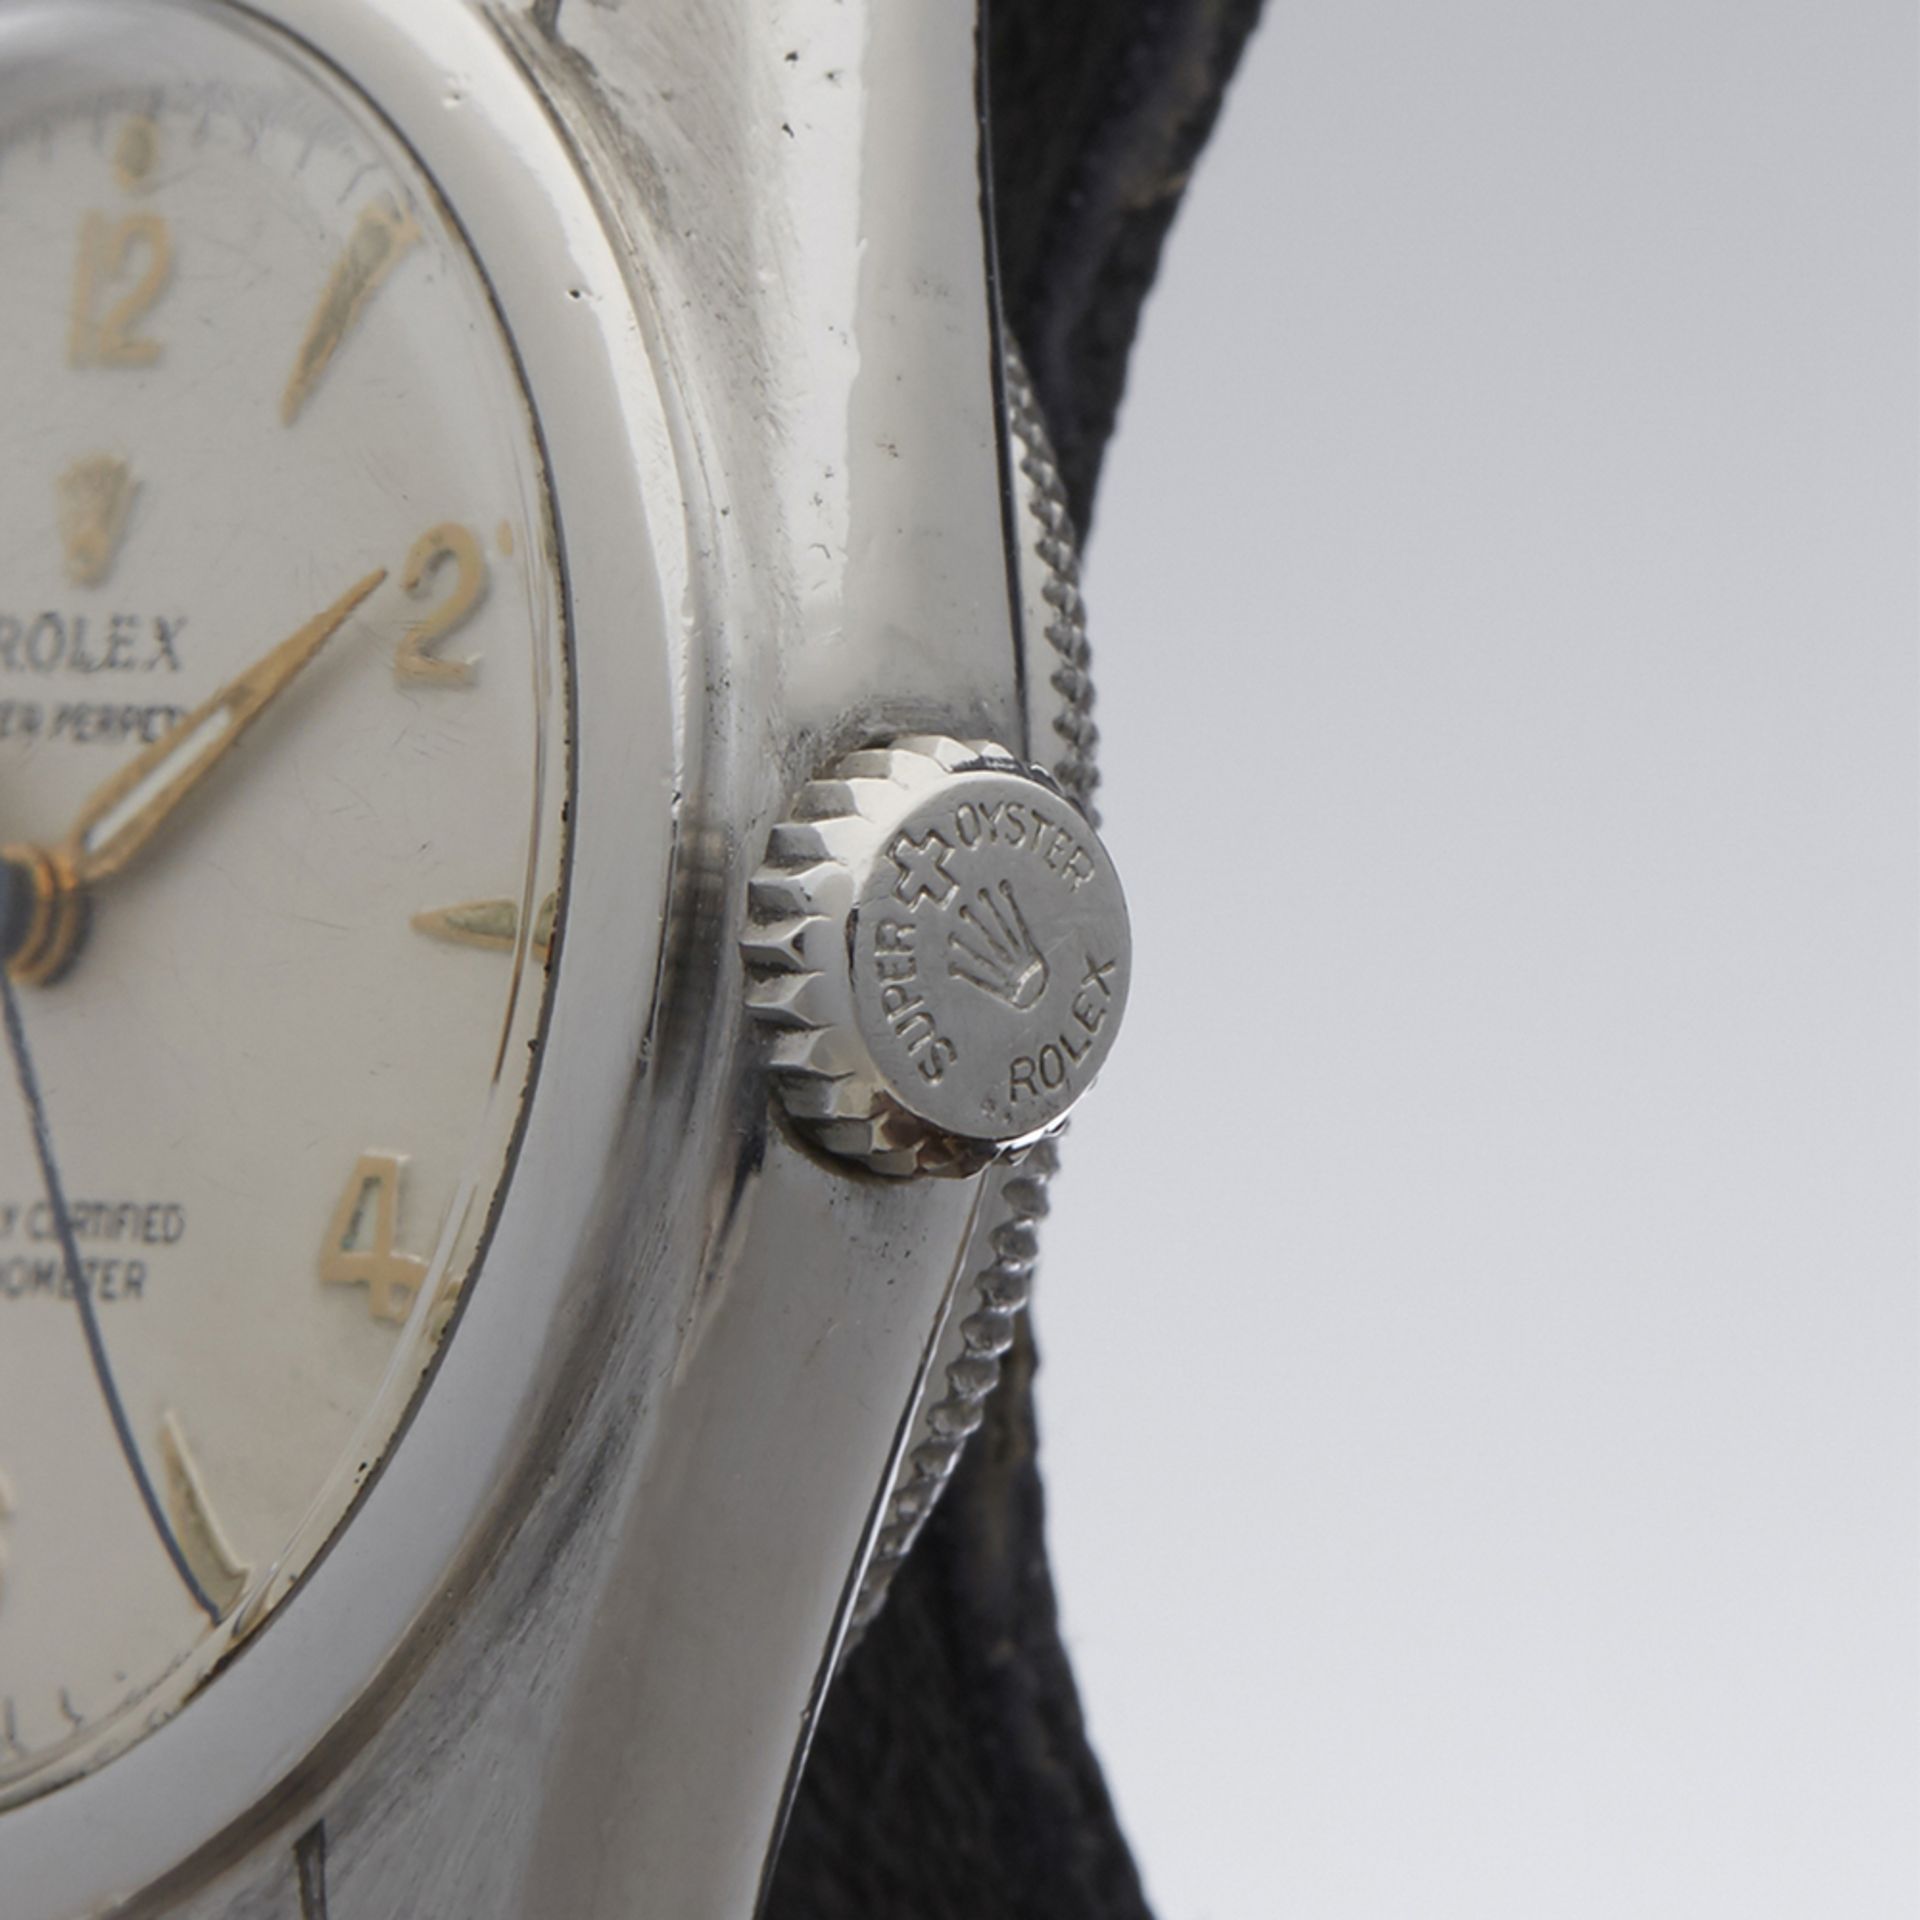 Rolex Vintage Bubble Back 32mm Stainless Steel - 6050 - Image 4 of 9